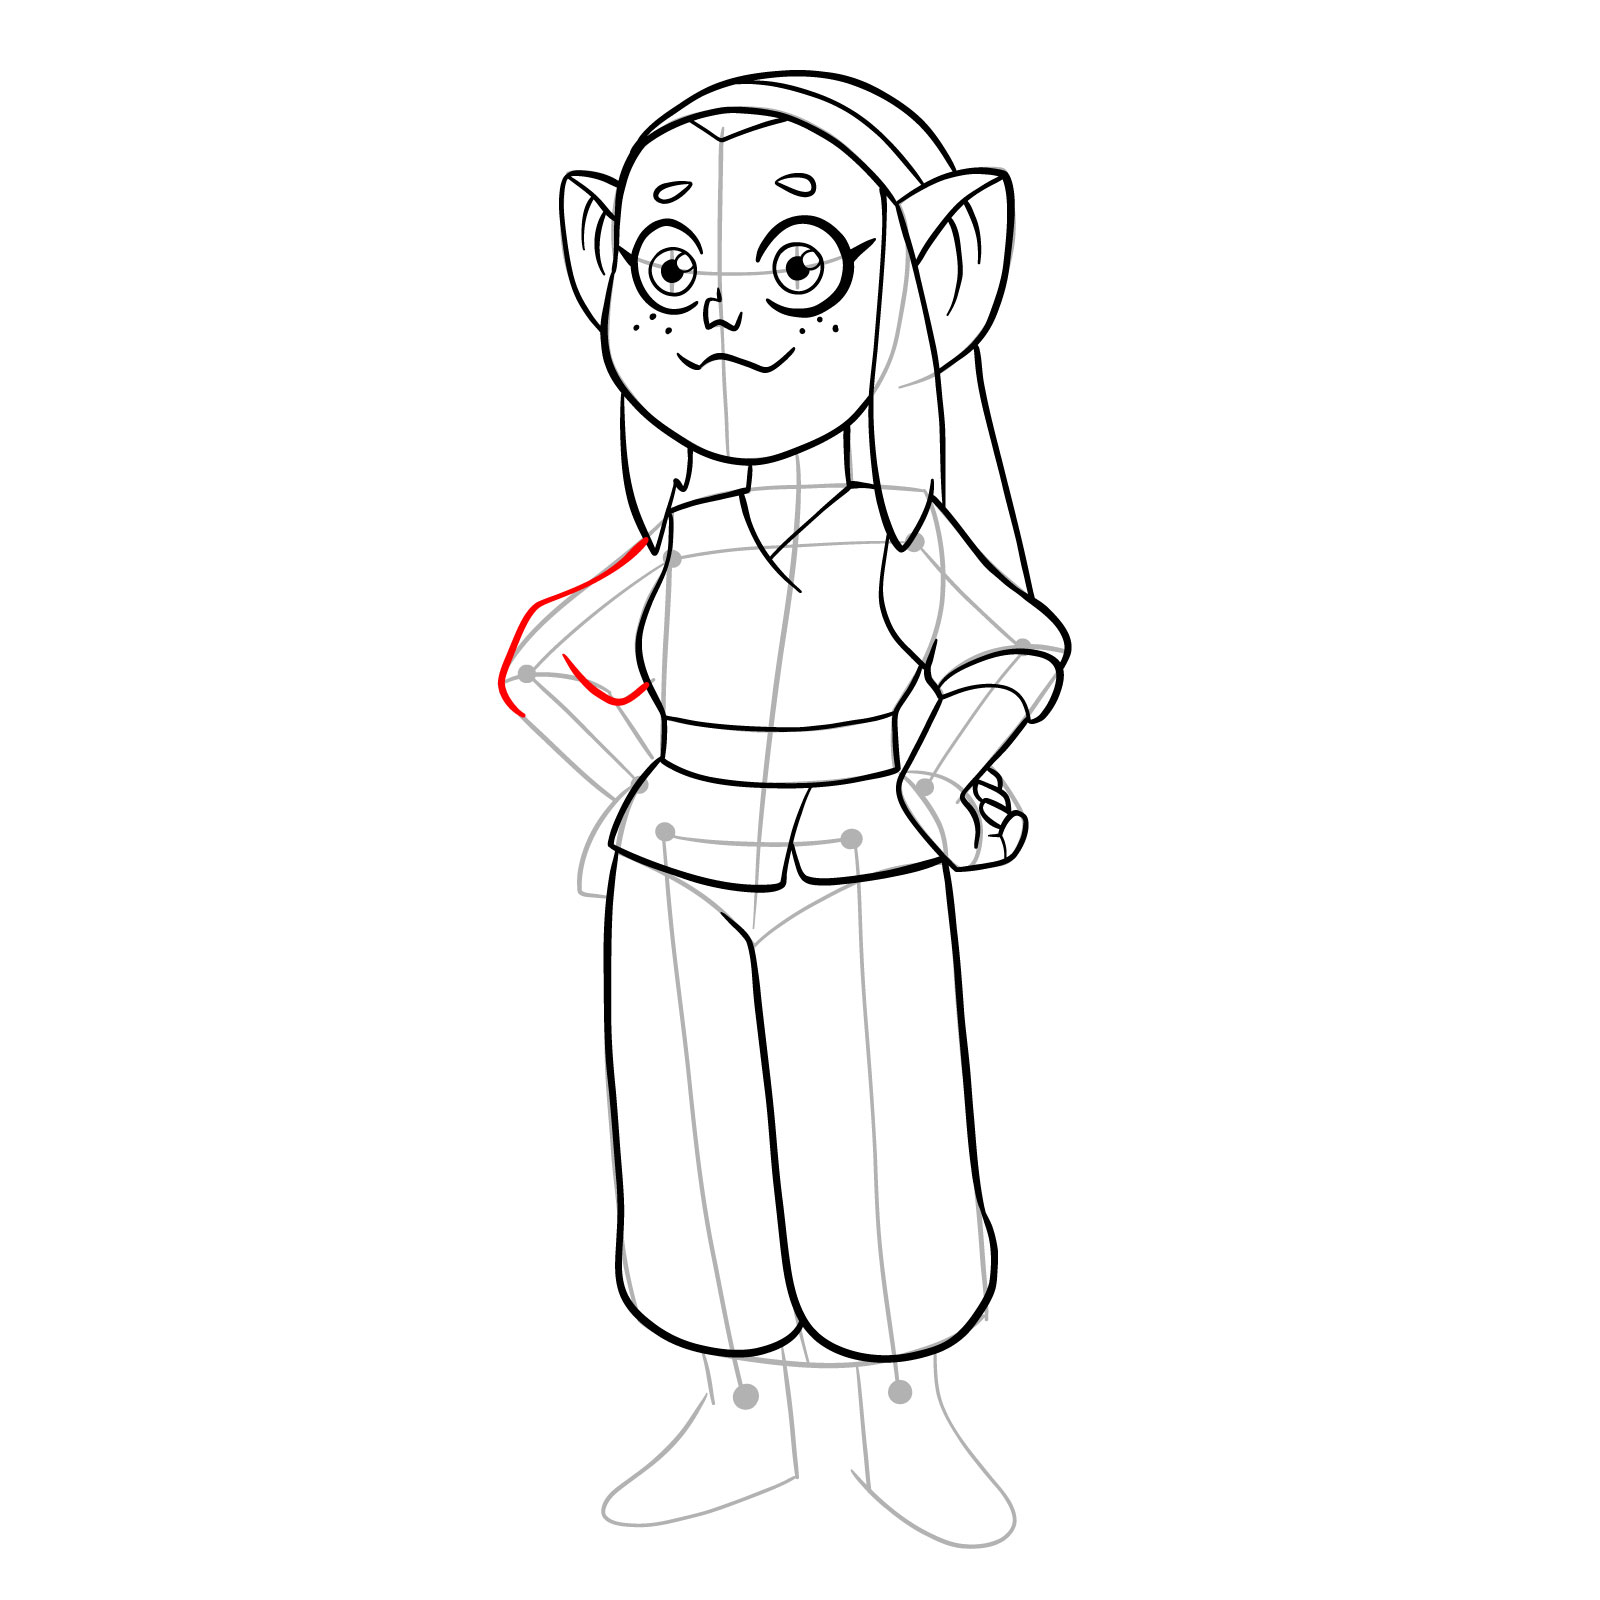 How to draw Amber from The Owl House - step 22